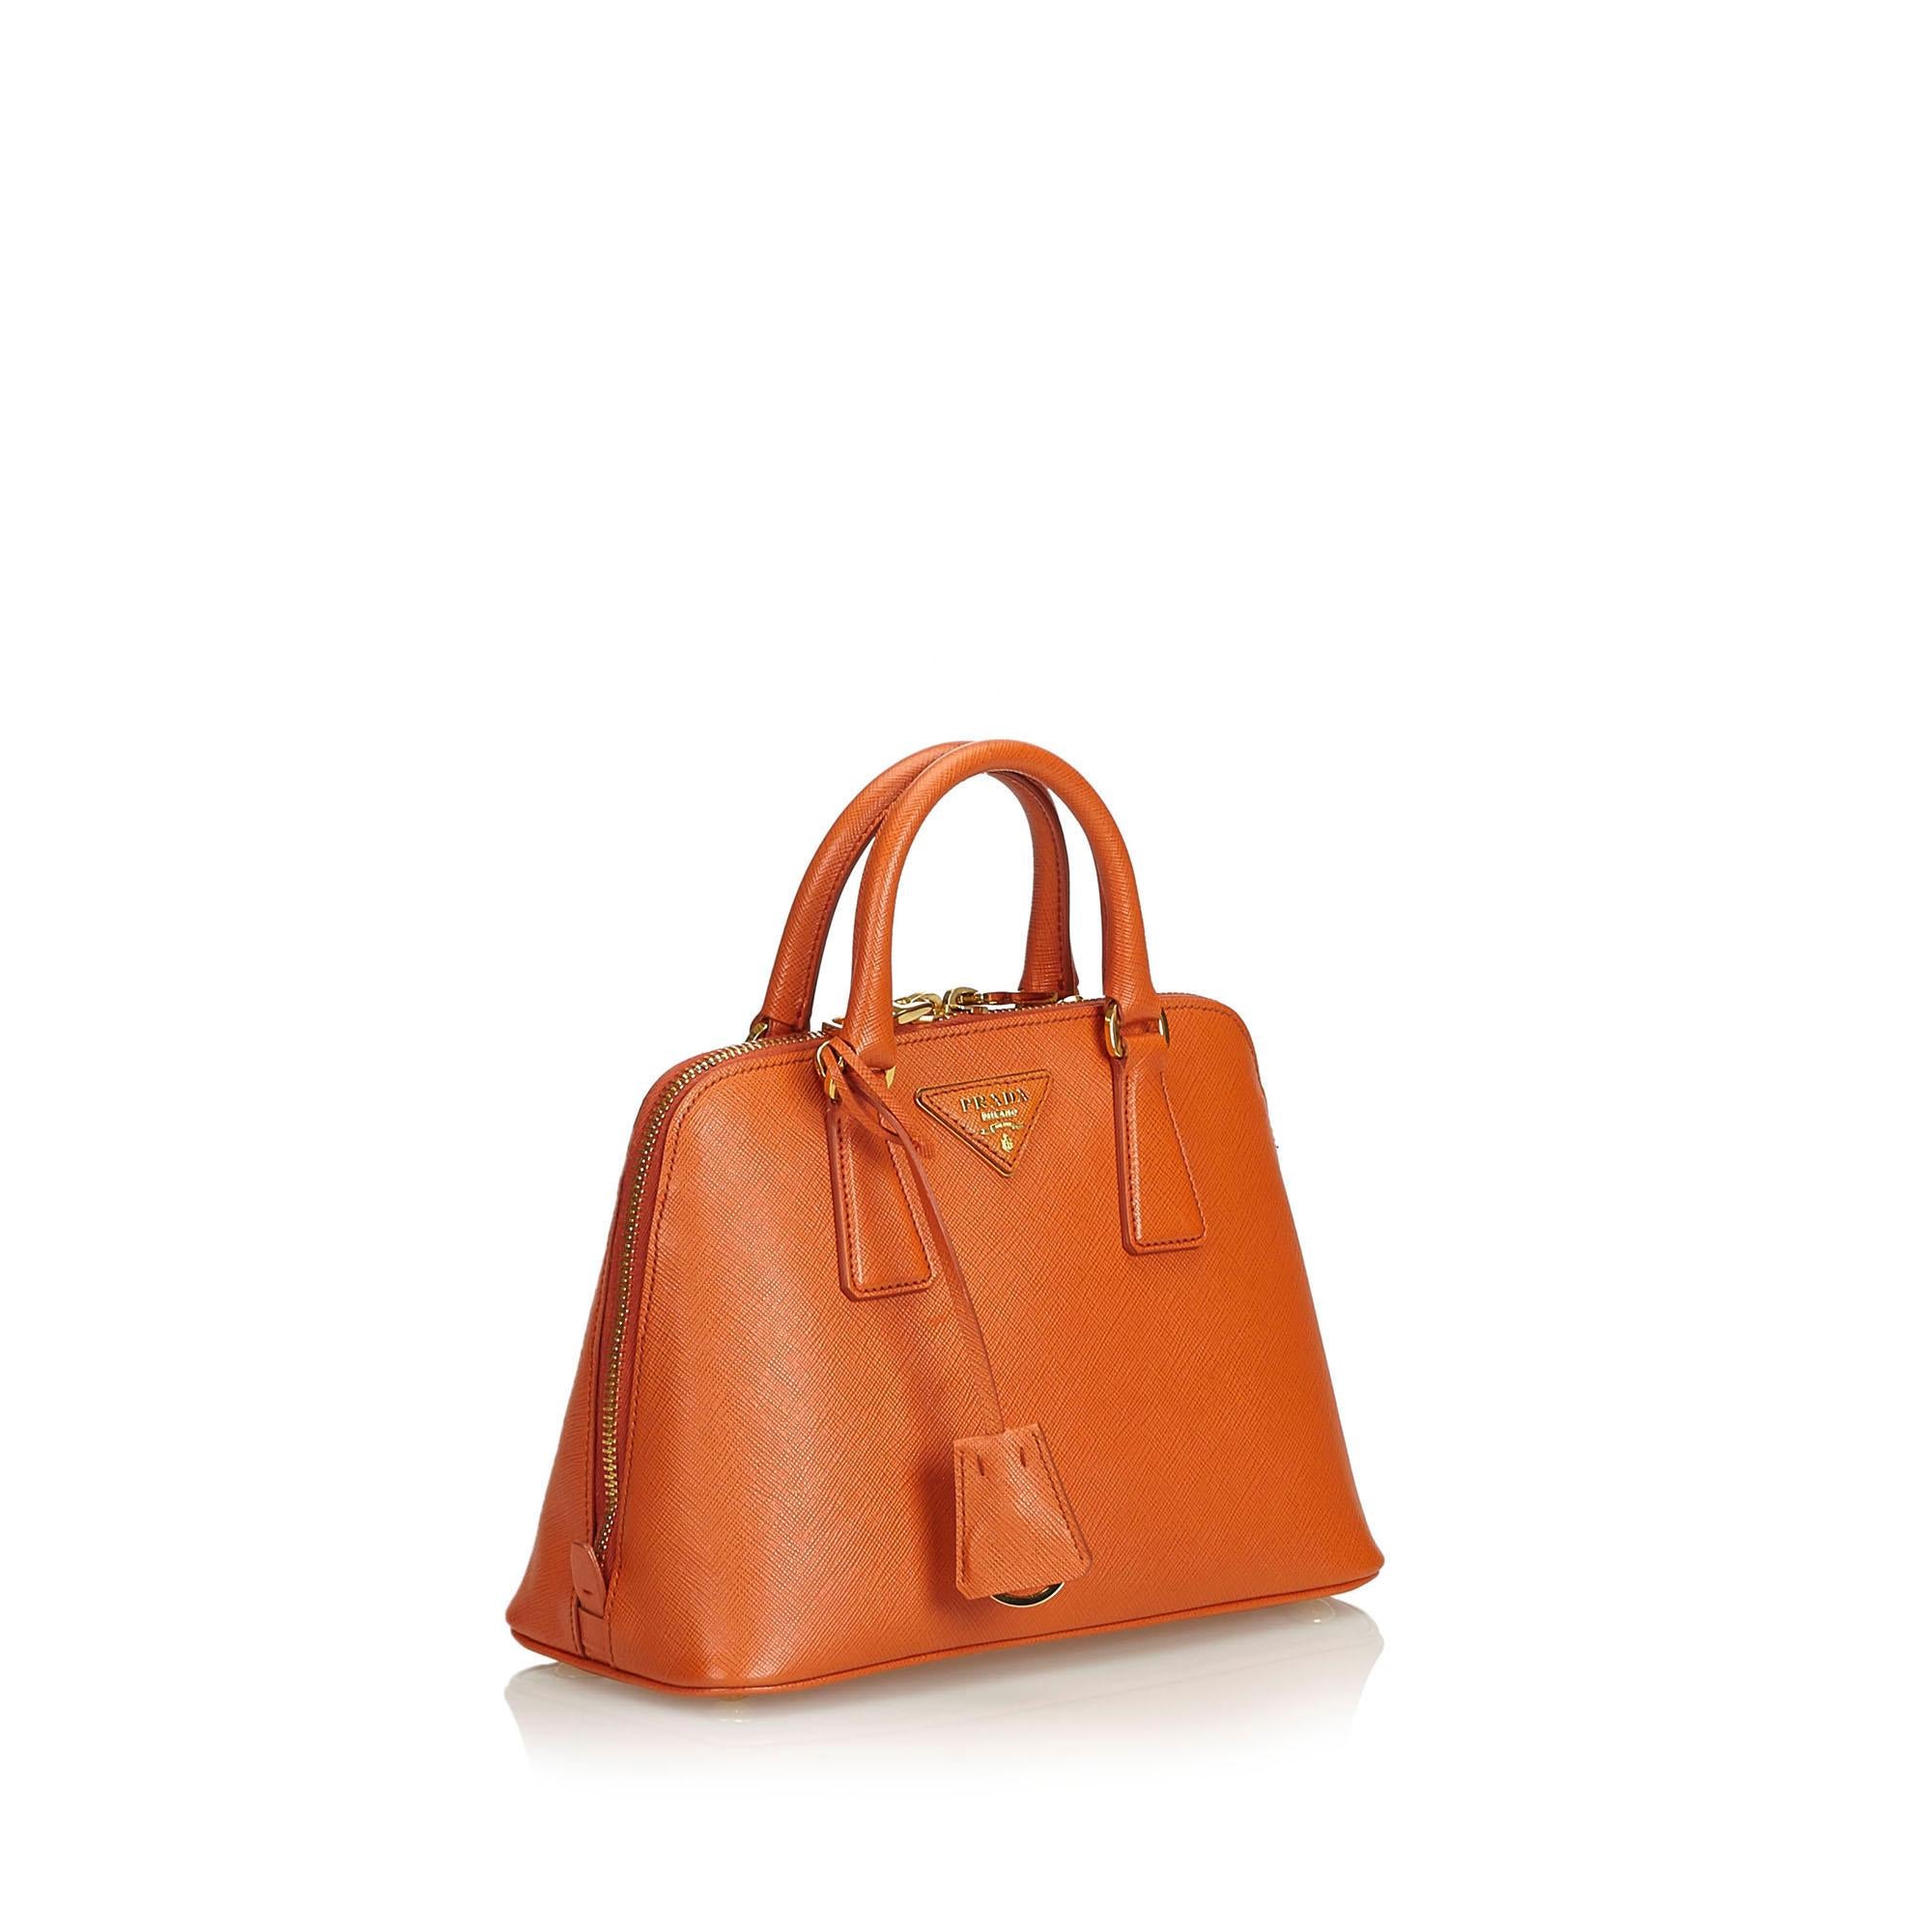 The Lux Promenade handbag features a saffiano leather body, rolled leather handles, a flat strap, a top zip closure, an interior zip compartment, and interior zip and slip pockets. It carries as A condition rating.

Inclusions: 
Dust